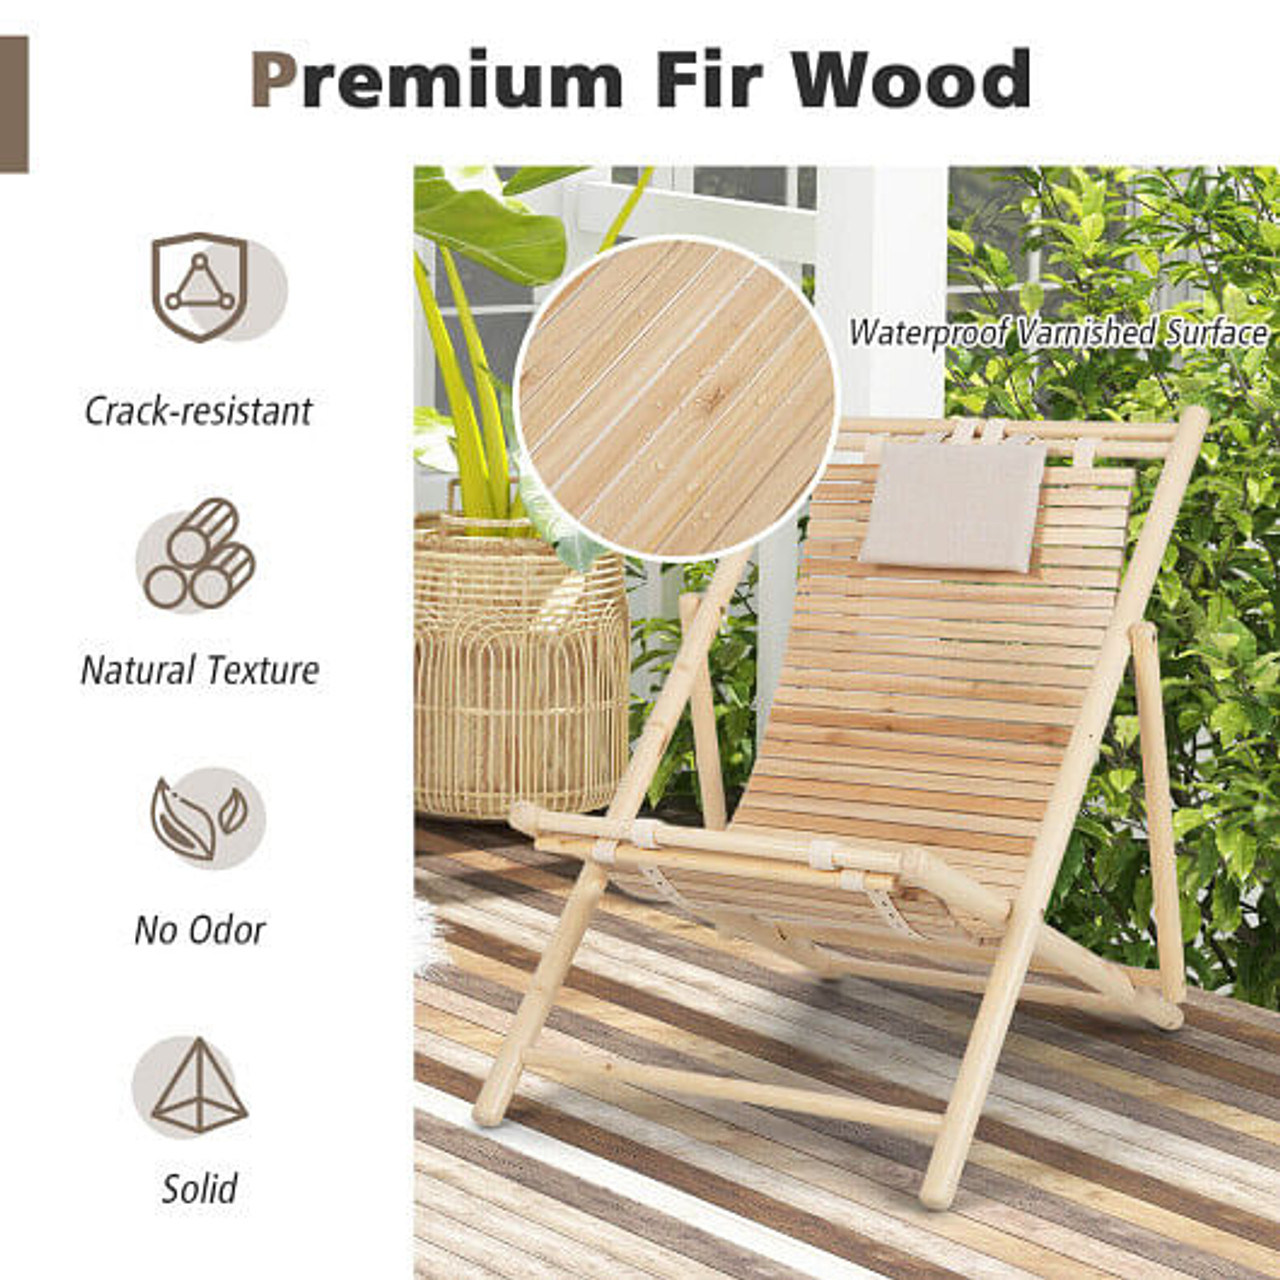 Solid Fir Wood Lounge Chair with 3-Level Adjustable Backrest and Soft Padded Headrest-Natural